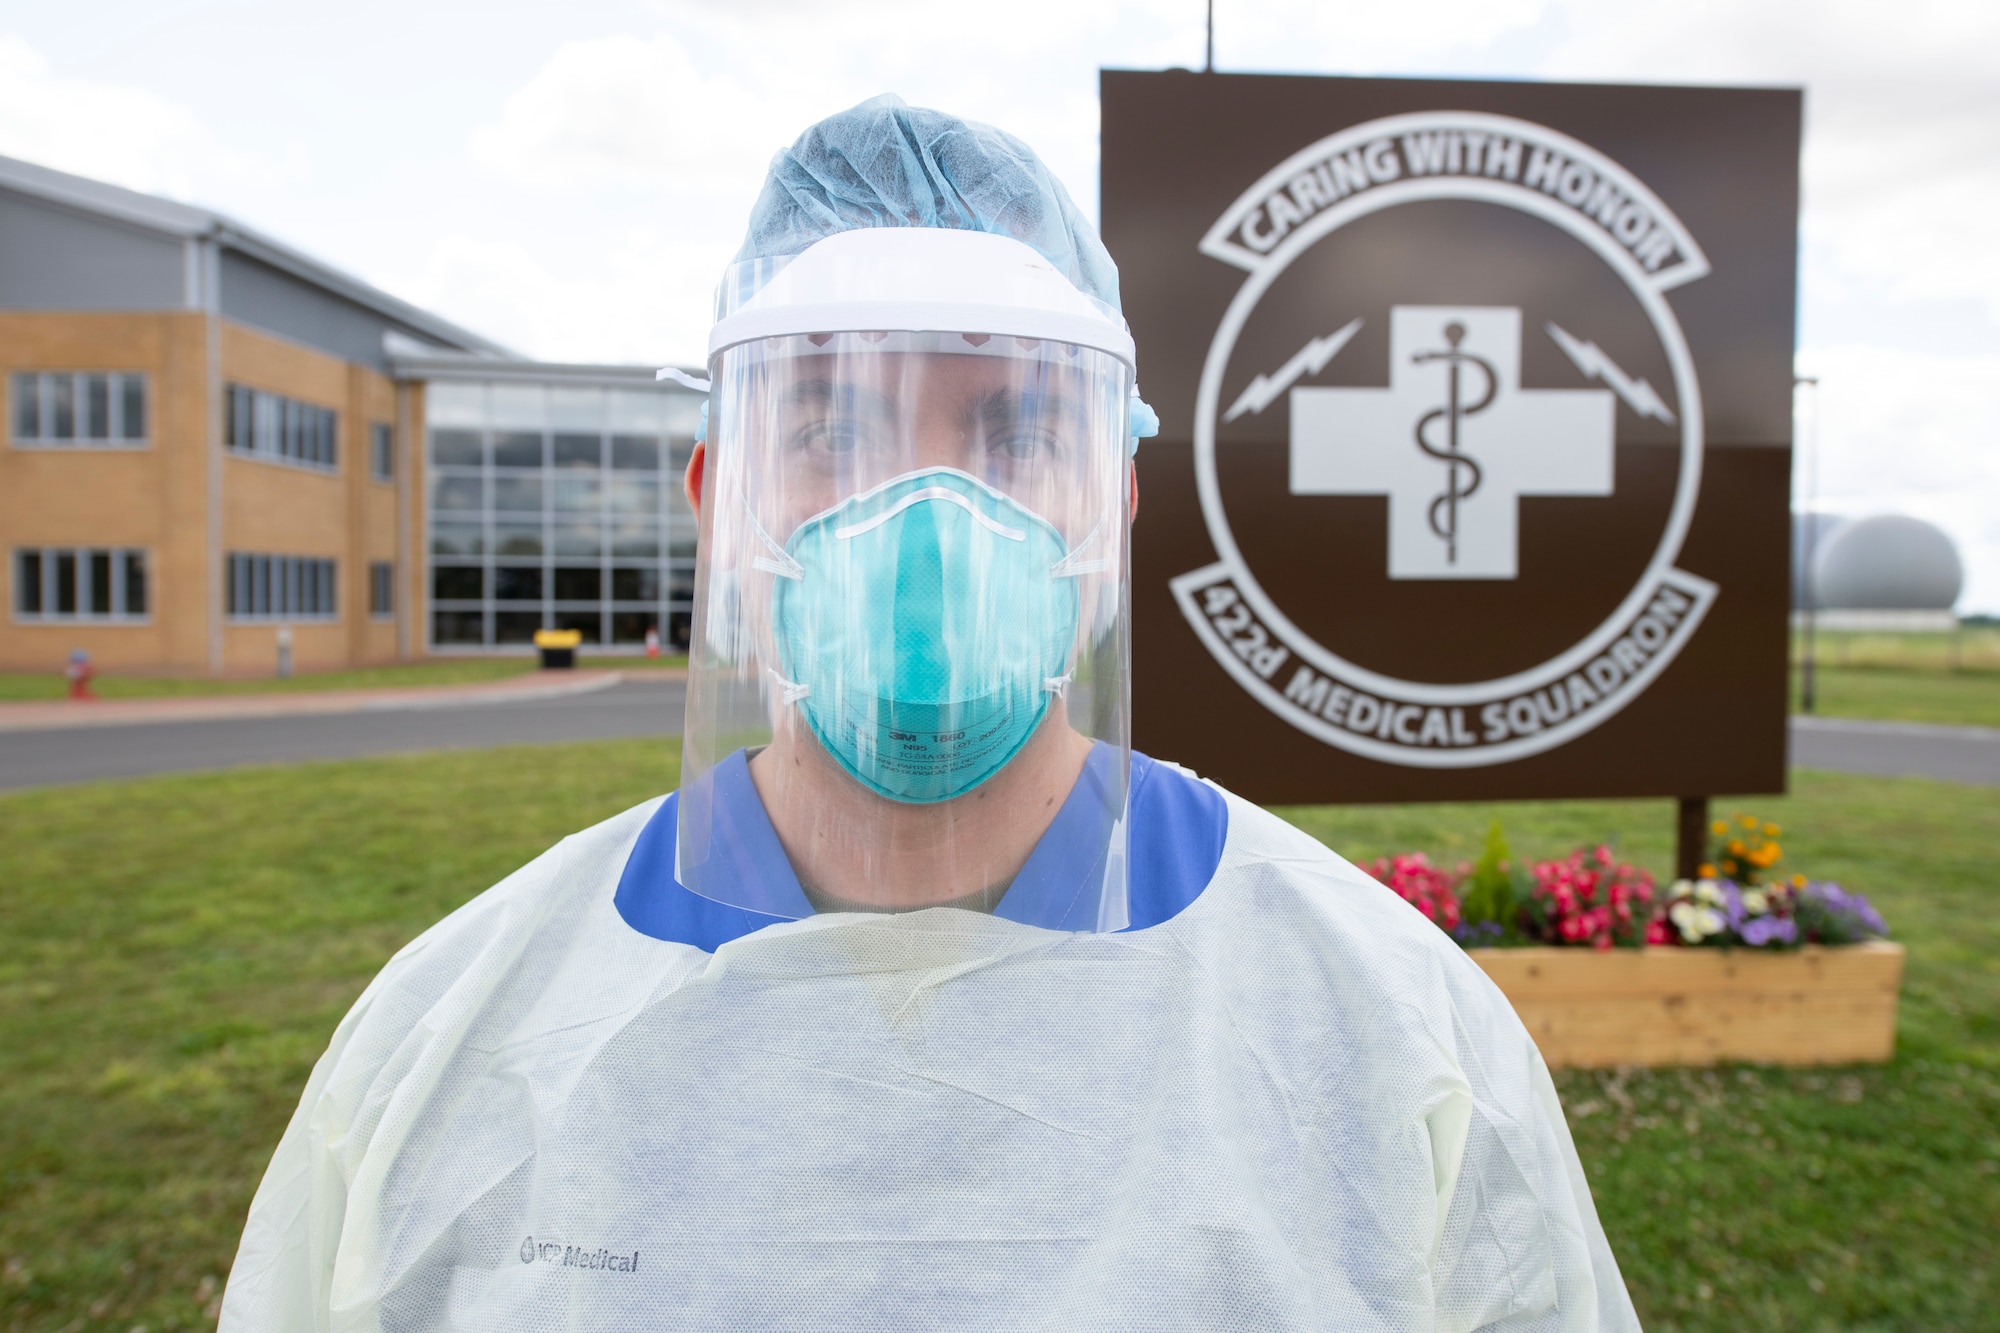 U.S. Air Force Tech. Sgt. Steve Zavala, 422nd Medical Squadron medical operations flight chief and trusted care champion, poses for a photo in front of the 422nd MDS building at RAF Croughton, England, August 3, 2020. Zavala discovered a COVID-19 testing technique that needed to be changed, so he elevated the concern and impacted testing procedures across the Department of Defense. (U.S. Air Force photo by Airman 1st Class Jennifer Zima).